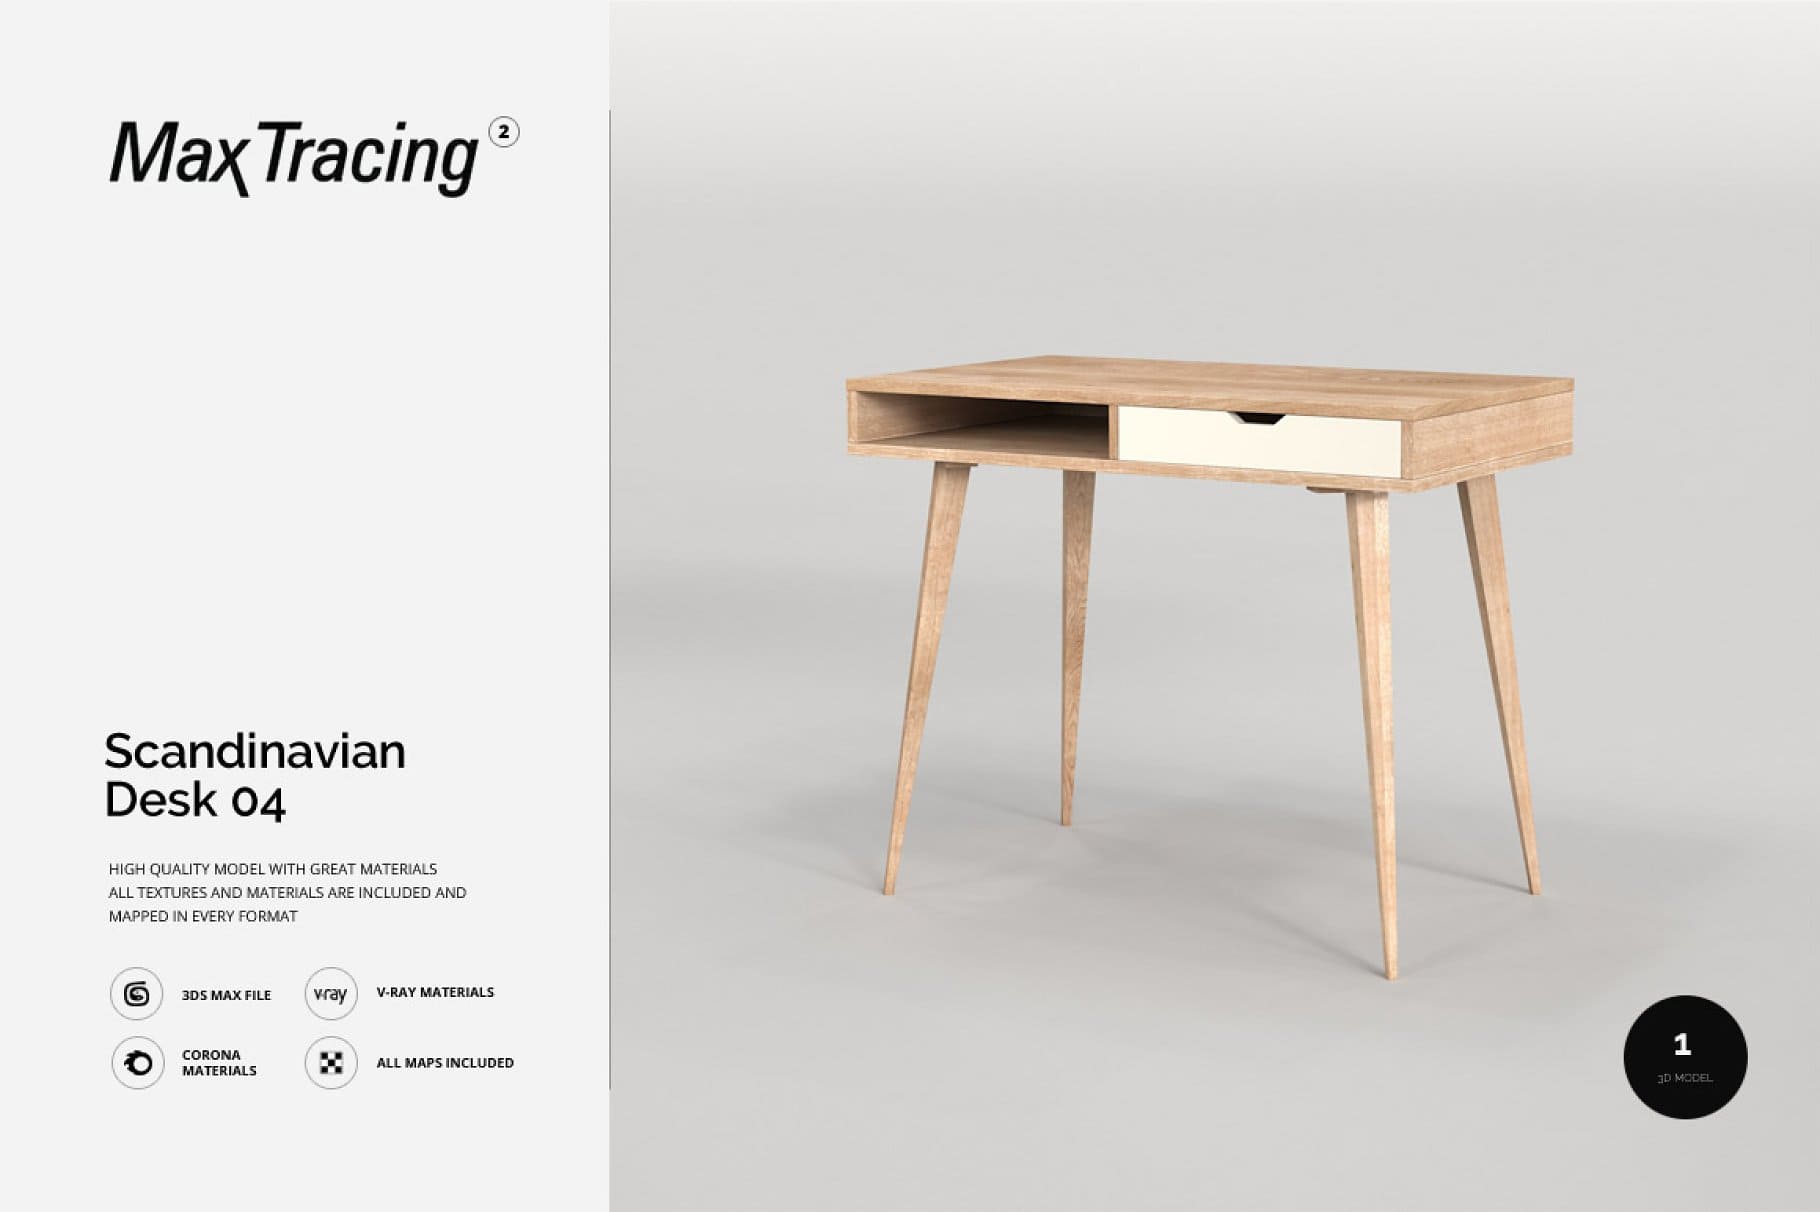 Scandinavian desk with shelves model 04 and "MaxTracing" logo.